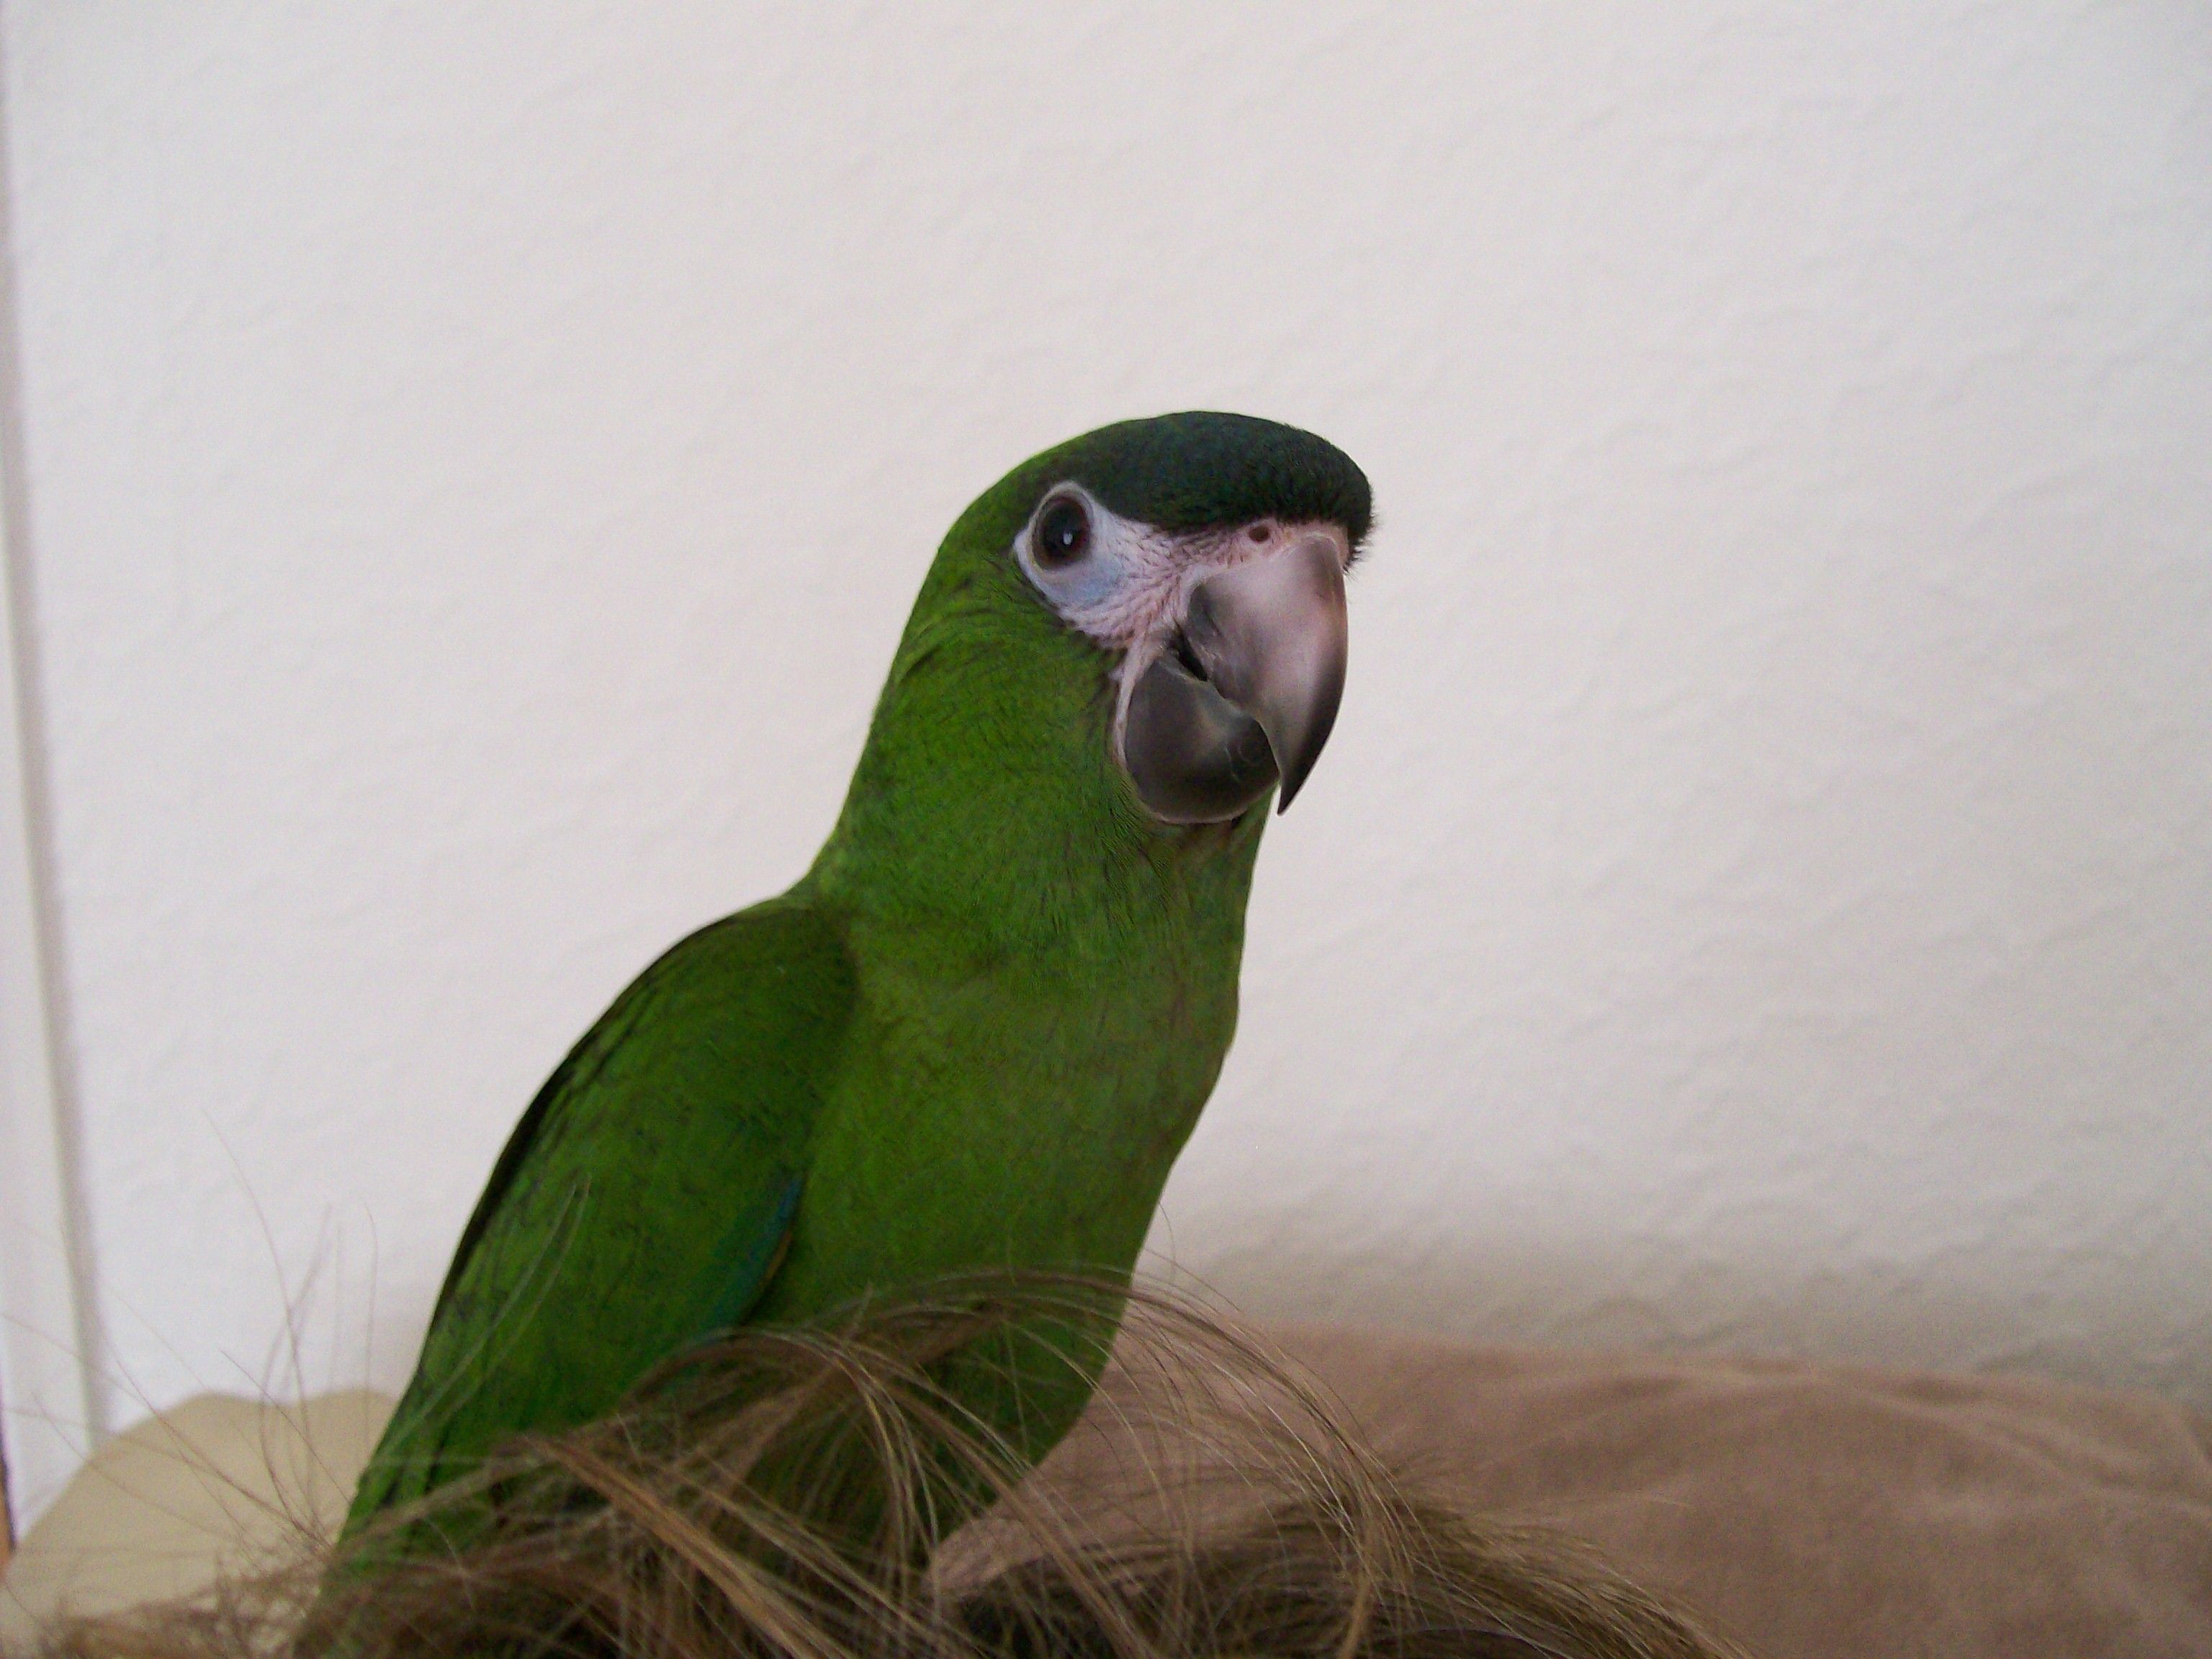 Mossy The Hahns Macaw